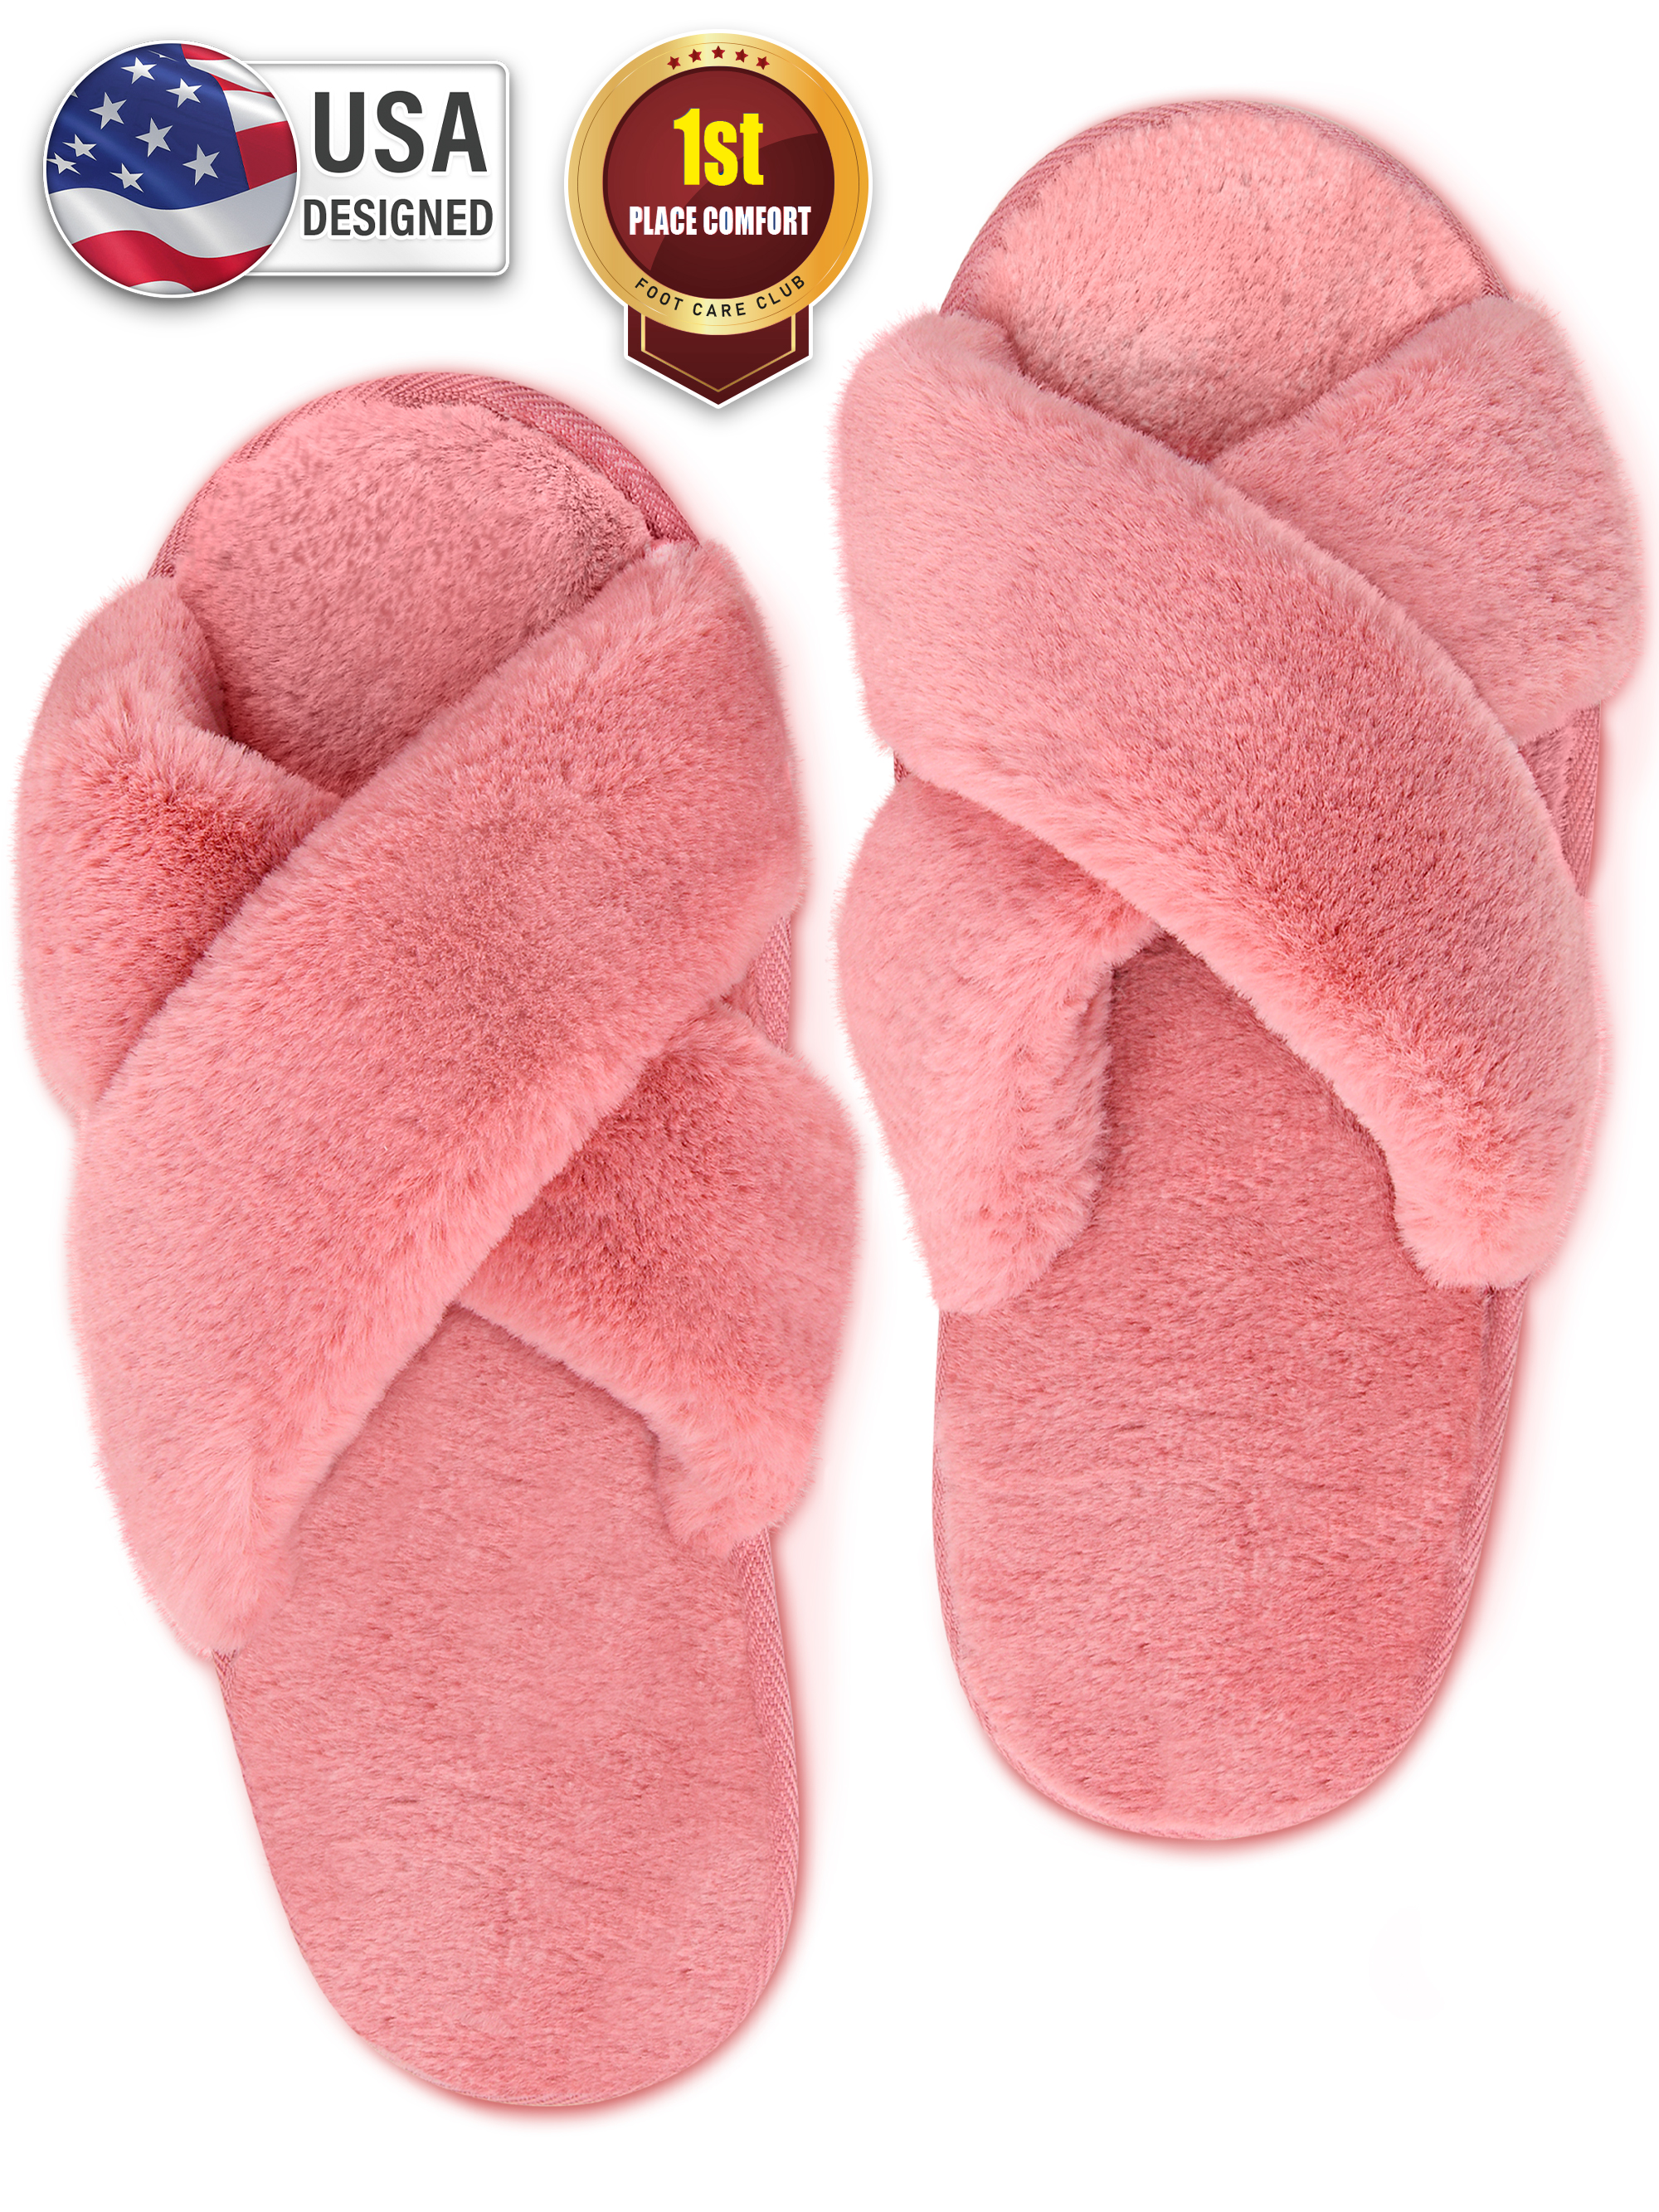 Bergman Kelly Open Toe Slippers for Women (Clouds Collection - Scuff Style), US Company - image 1 of 9